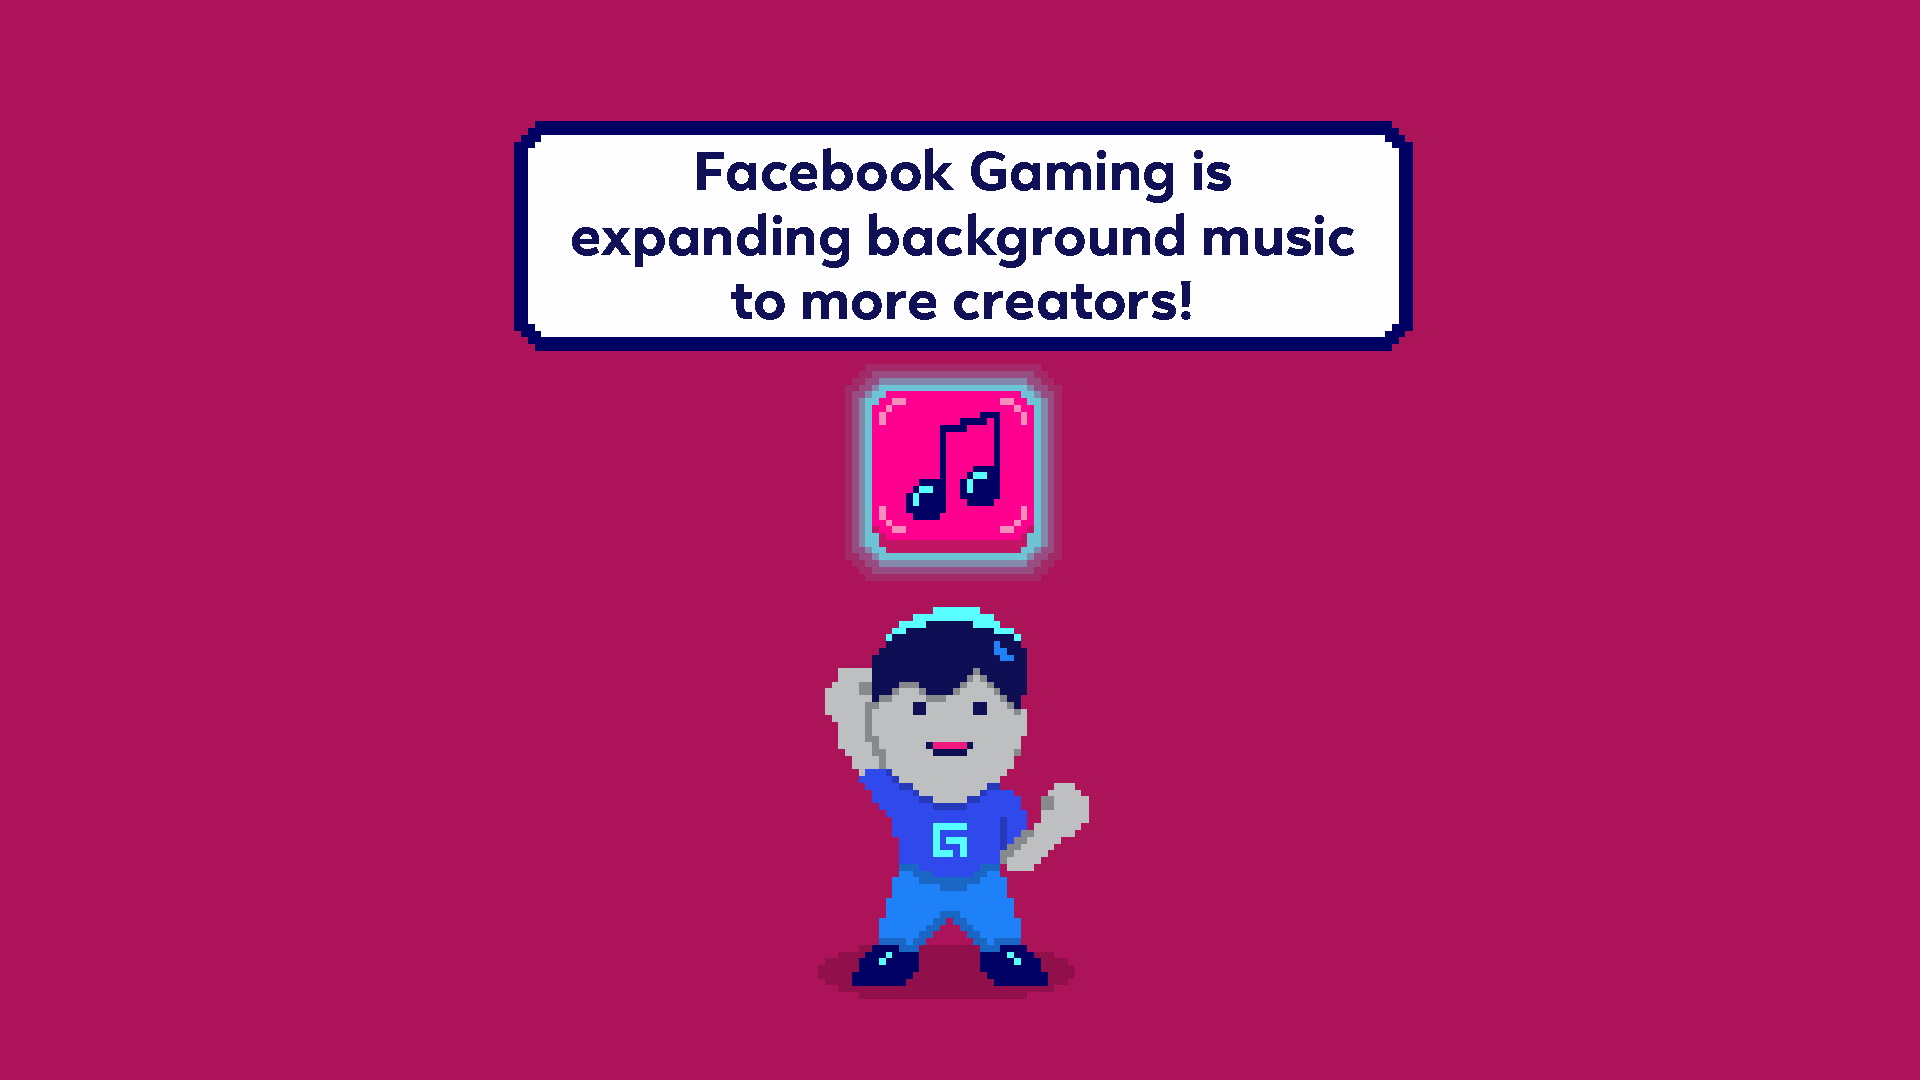 Your music is now playing on Facebook Gaming streams